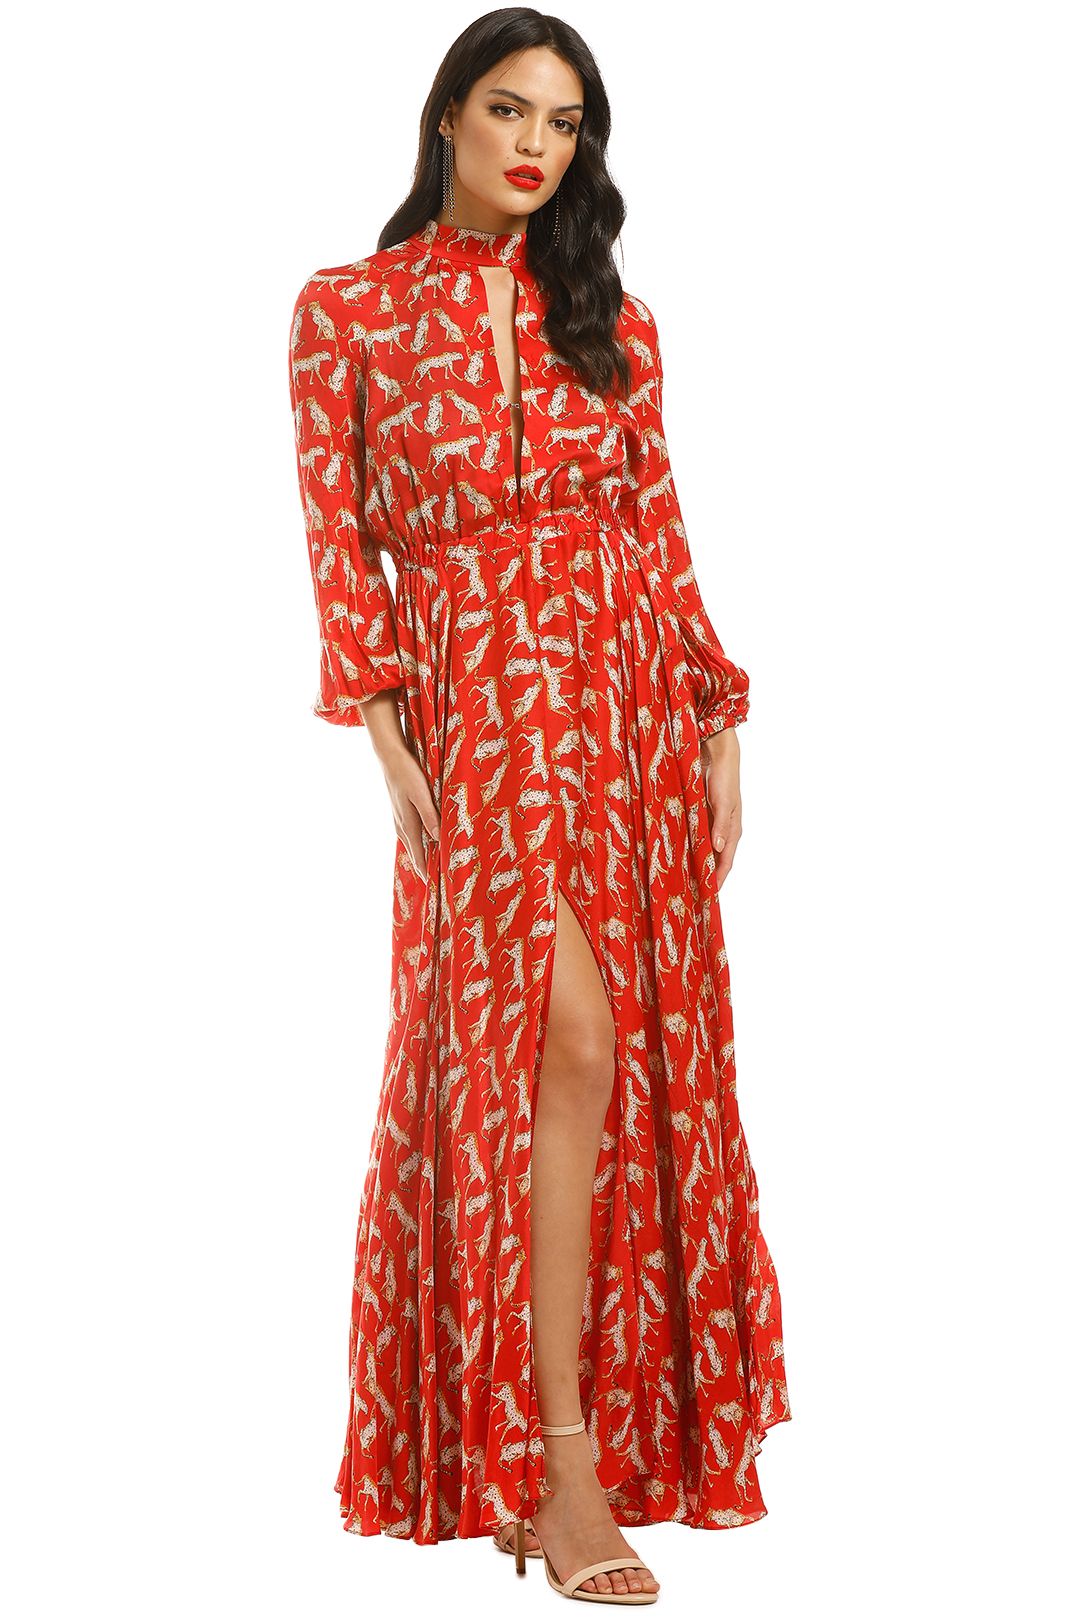 Emmie Dress in Red by Milly for Hire ...